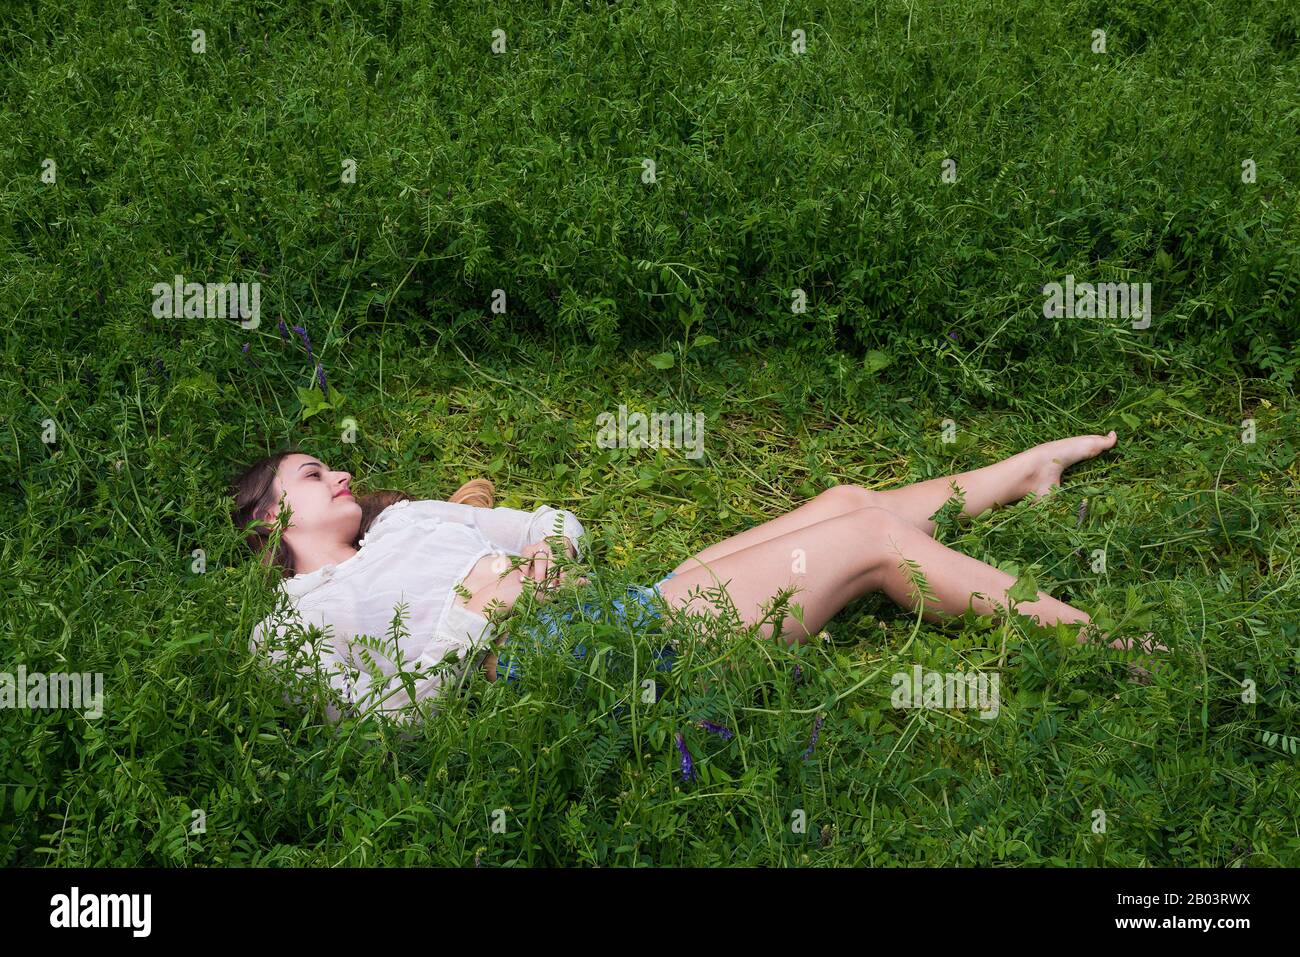 A young woman laying down in a field of vetch. Stock Photo